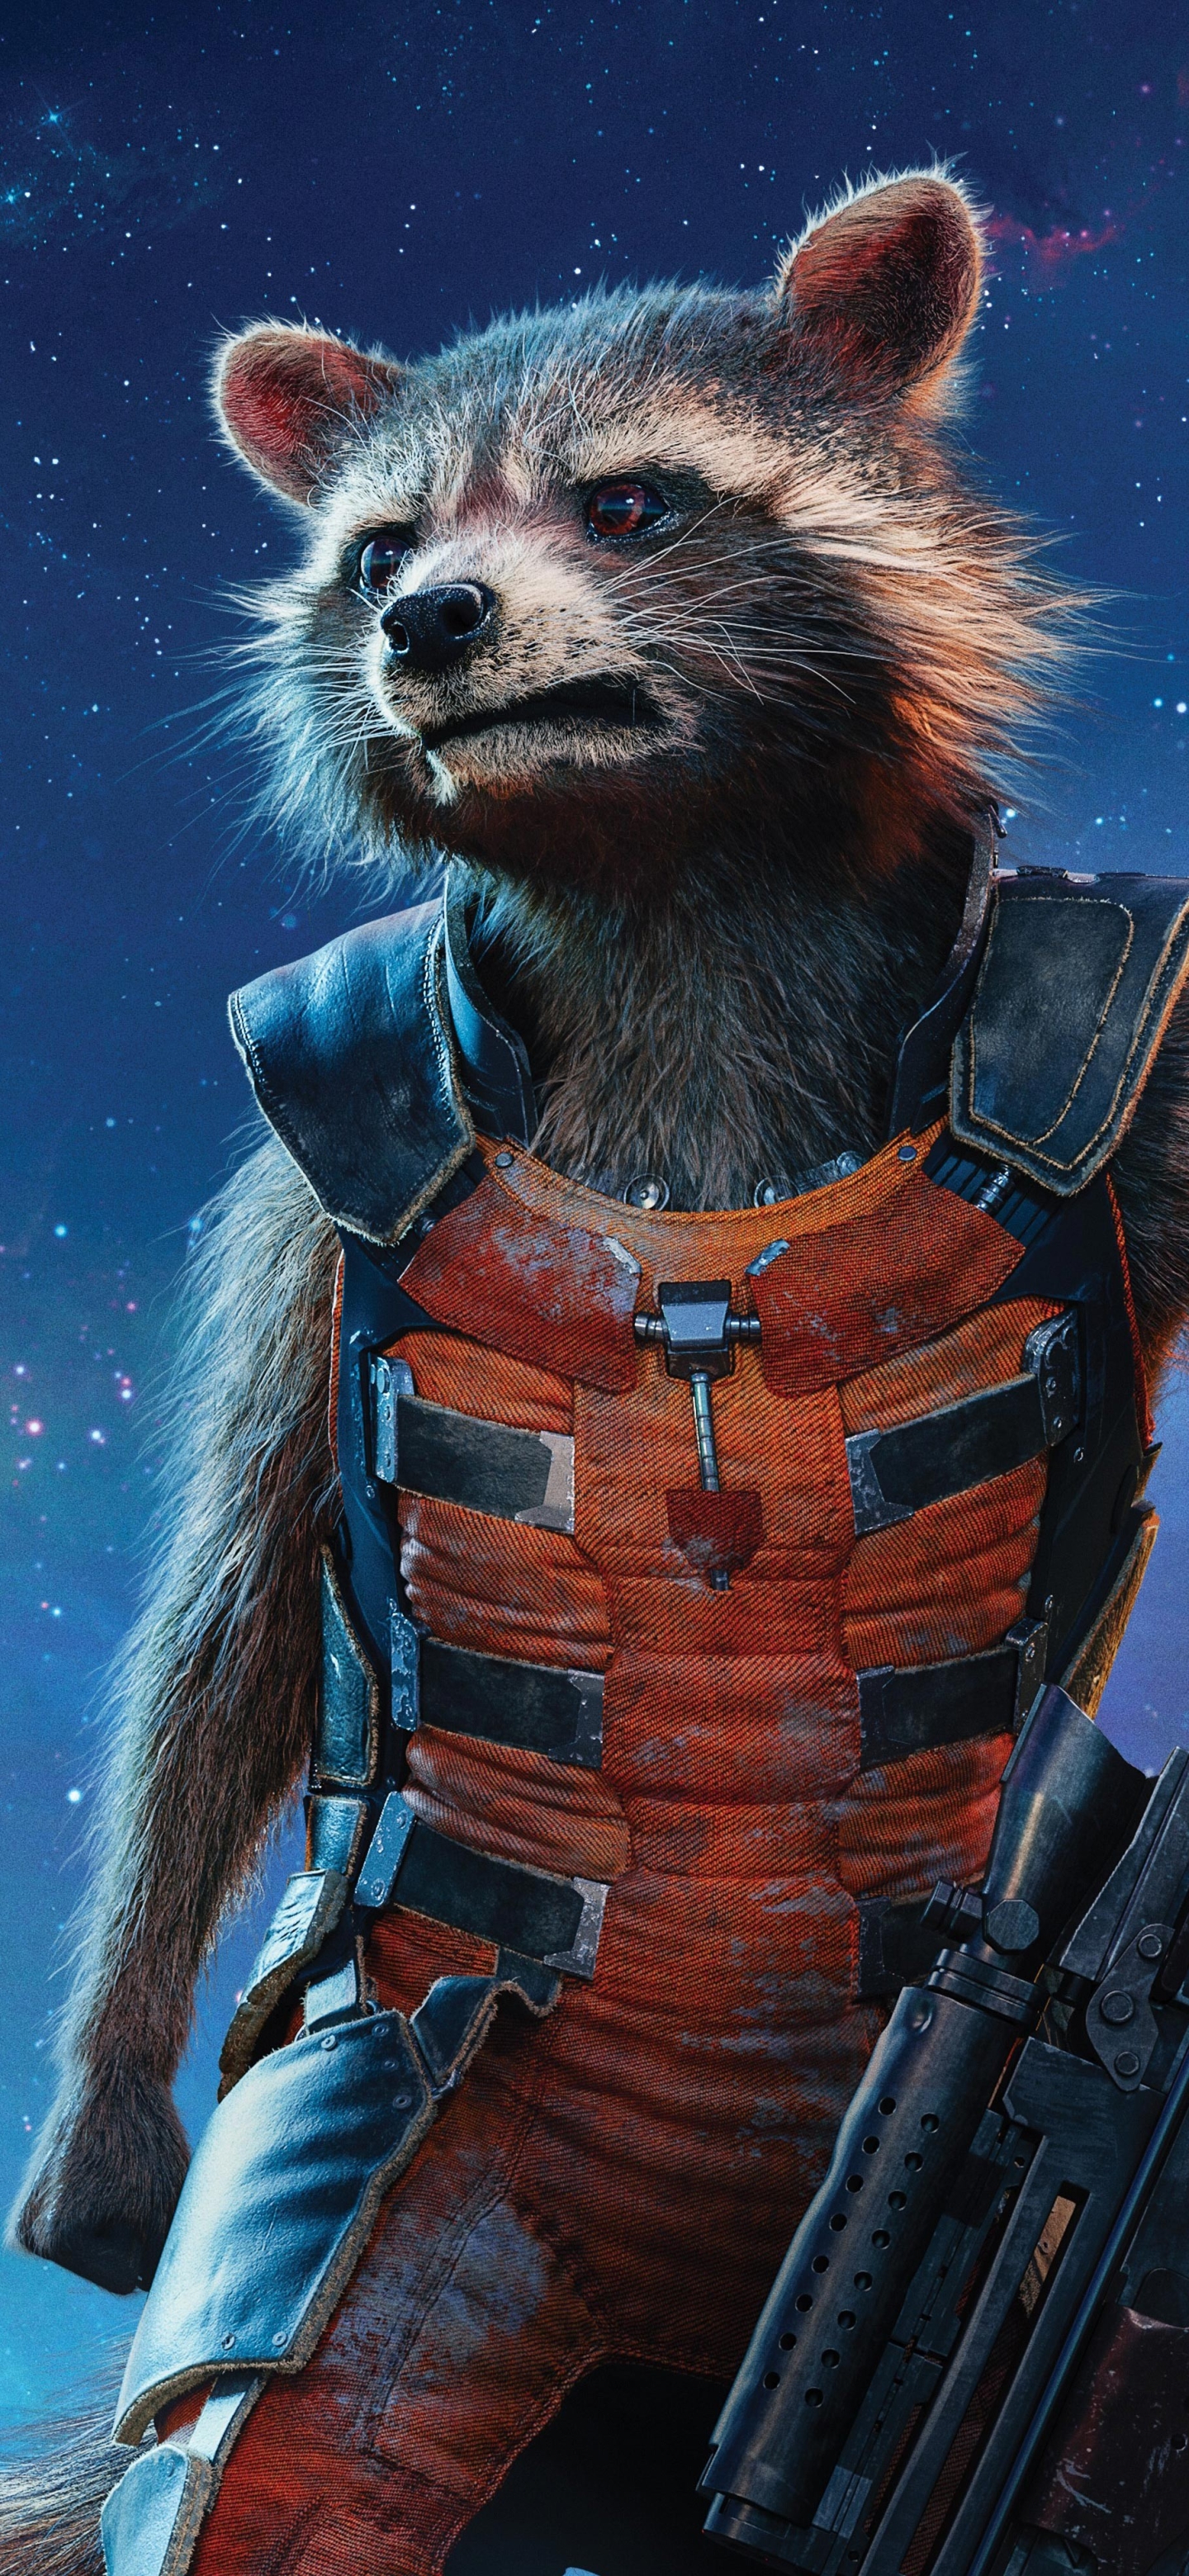 Guardians Of The Galaxy Vol 2 Neon Wallpapers